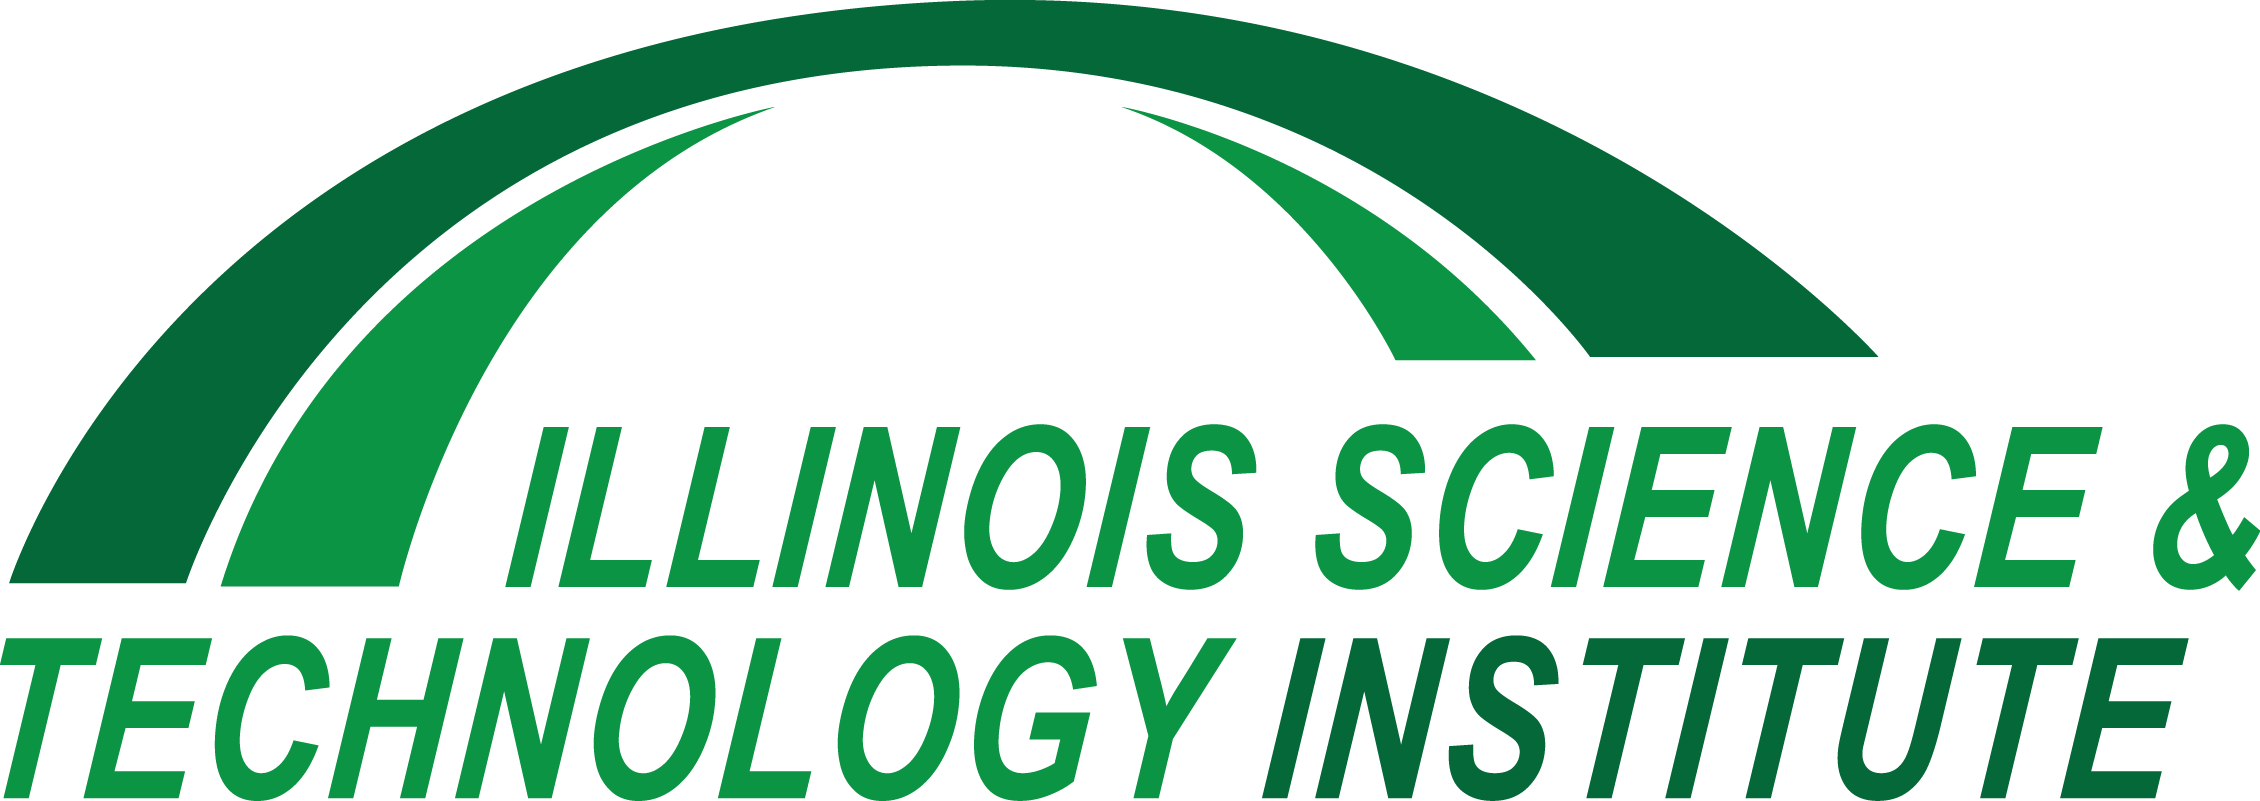 Illinois Science Technology & Institute logo v4.png